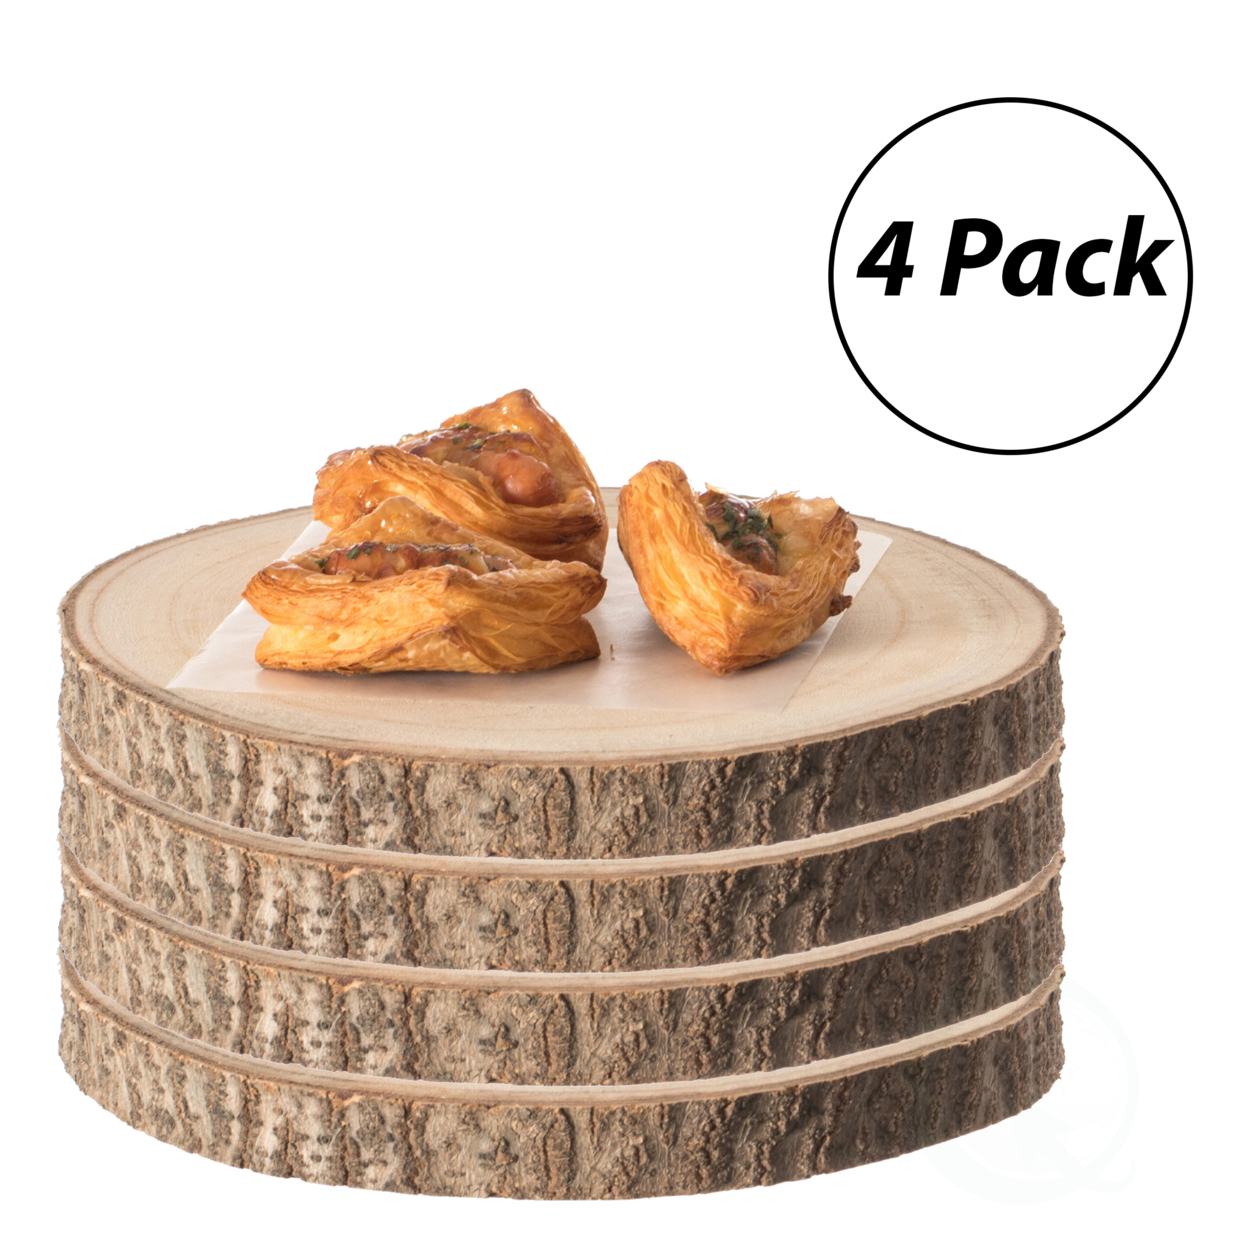 Home Decor Natural Wooden Bark Slice Tray Large Rustic Table Charger Centerpiece, Set Of 4 - 14